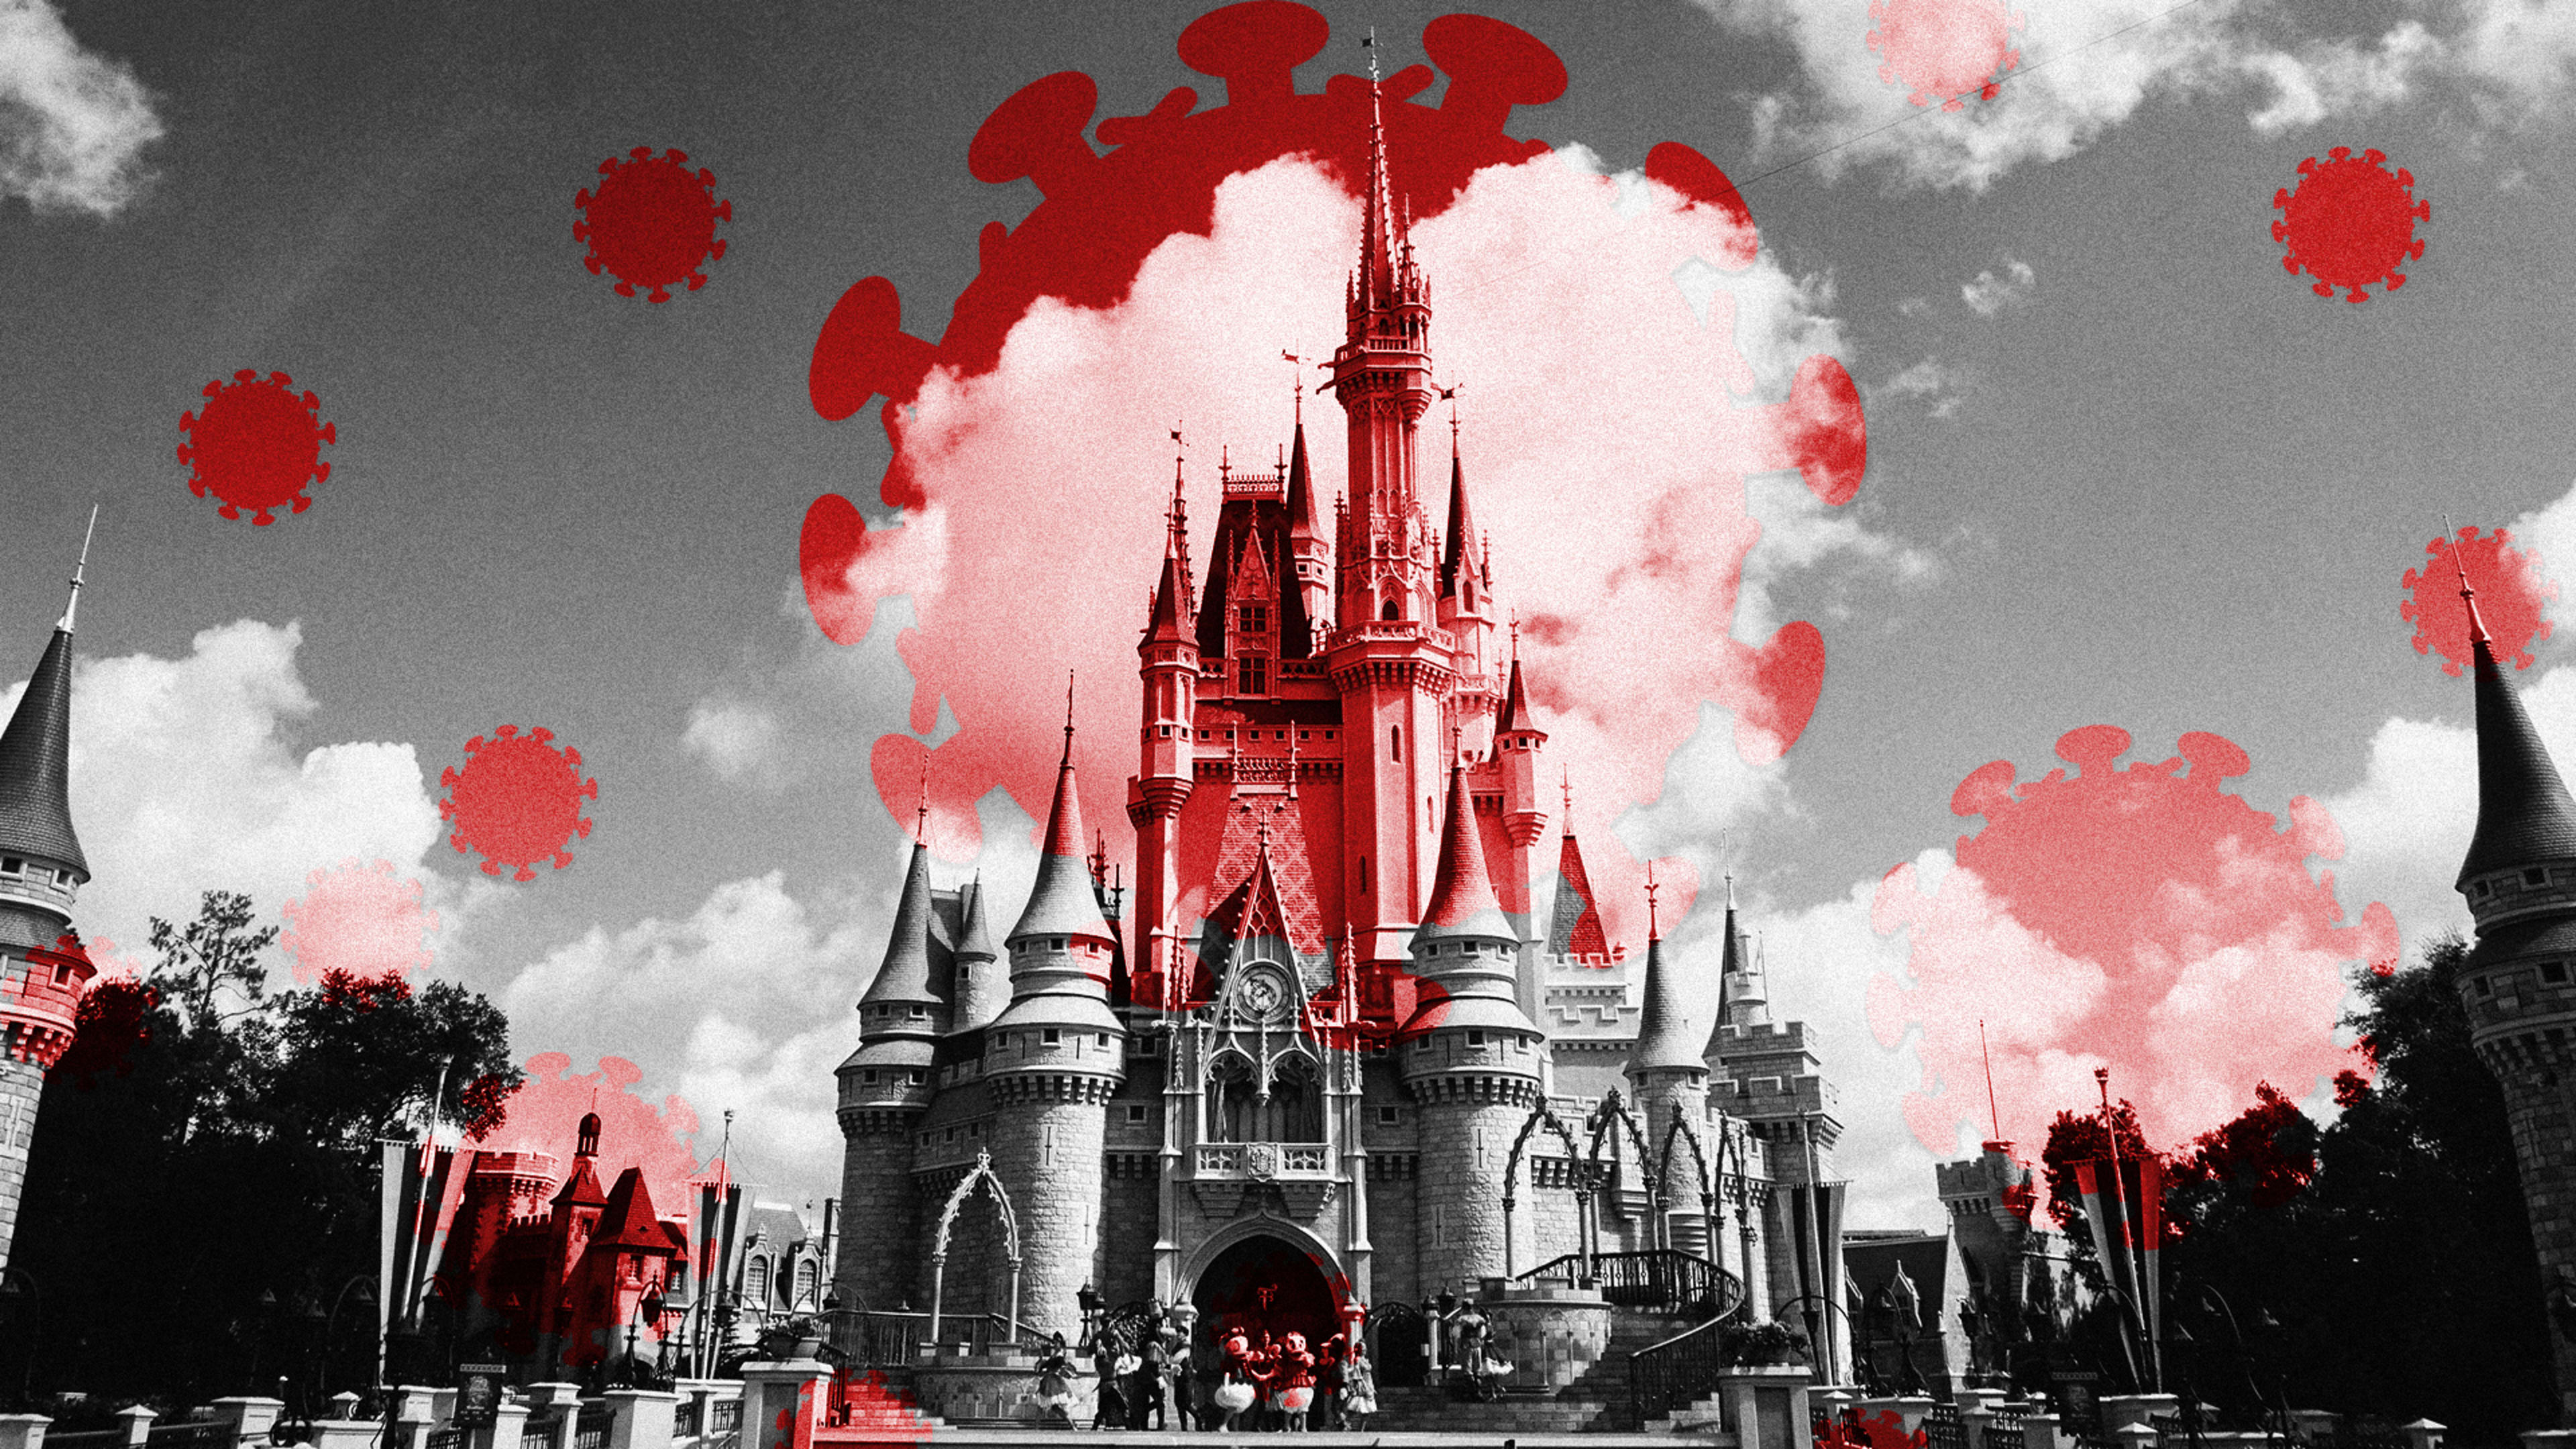 It’s a COVID-19 world after all, as Disney World reopens amid record new cases in Florida